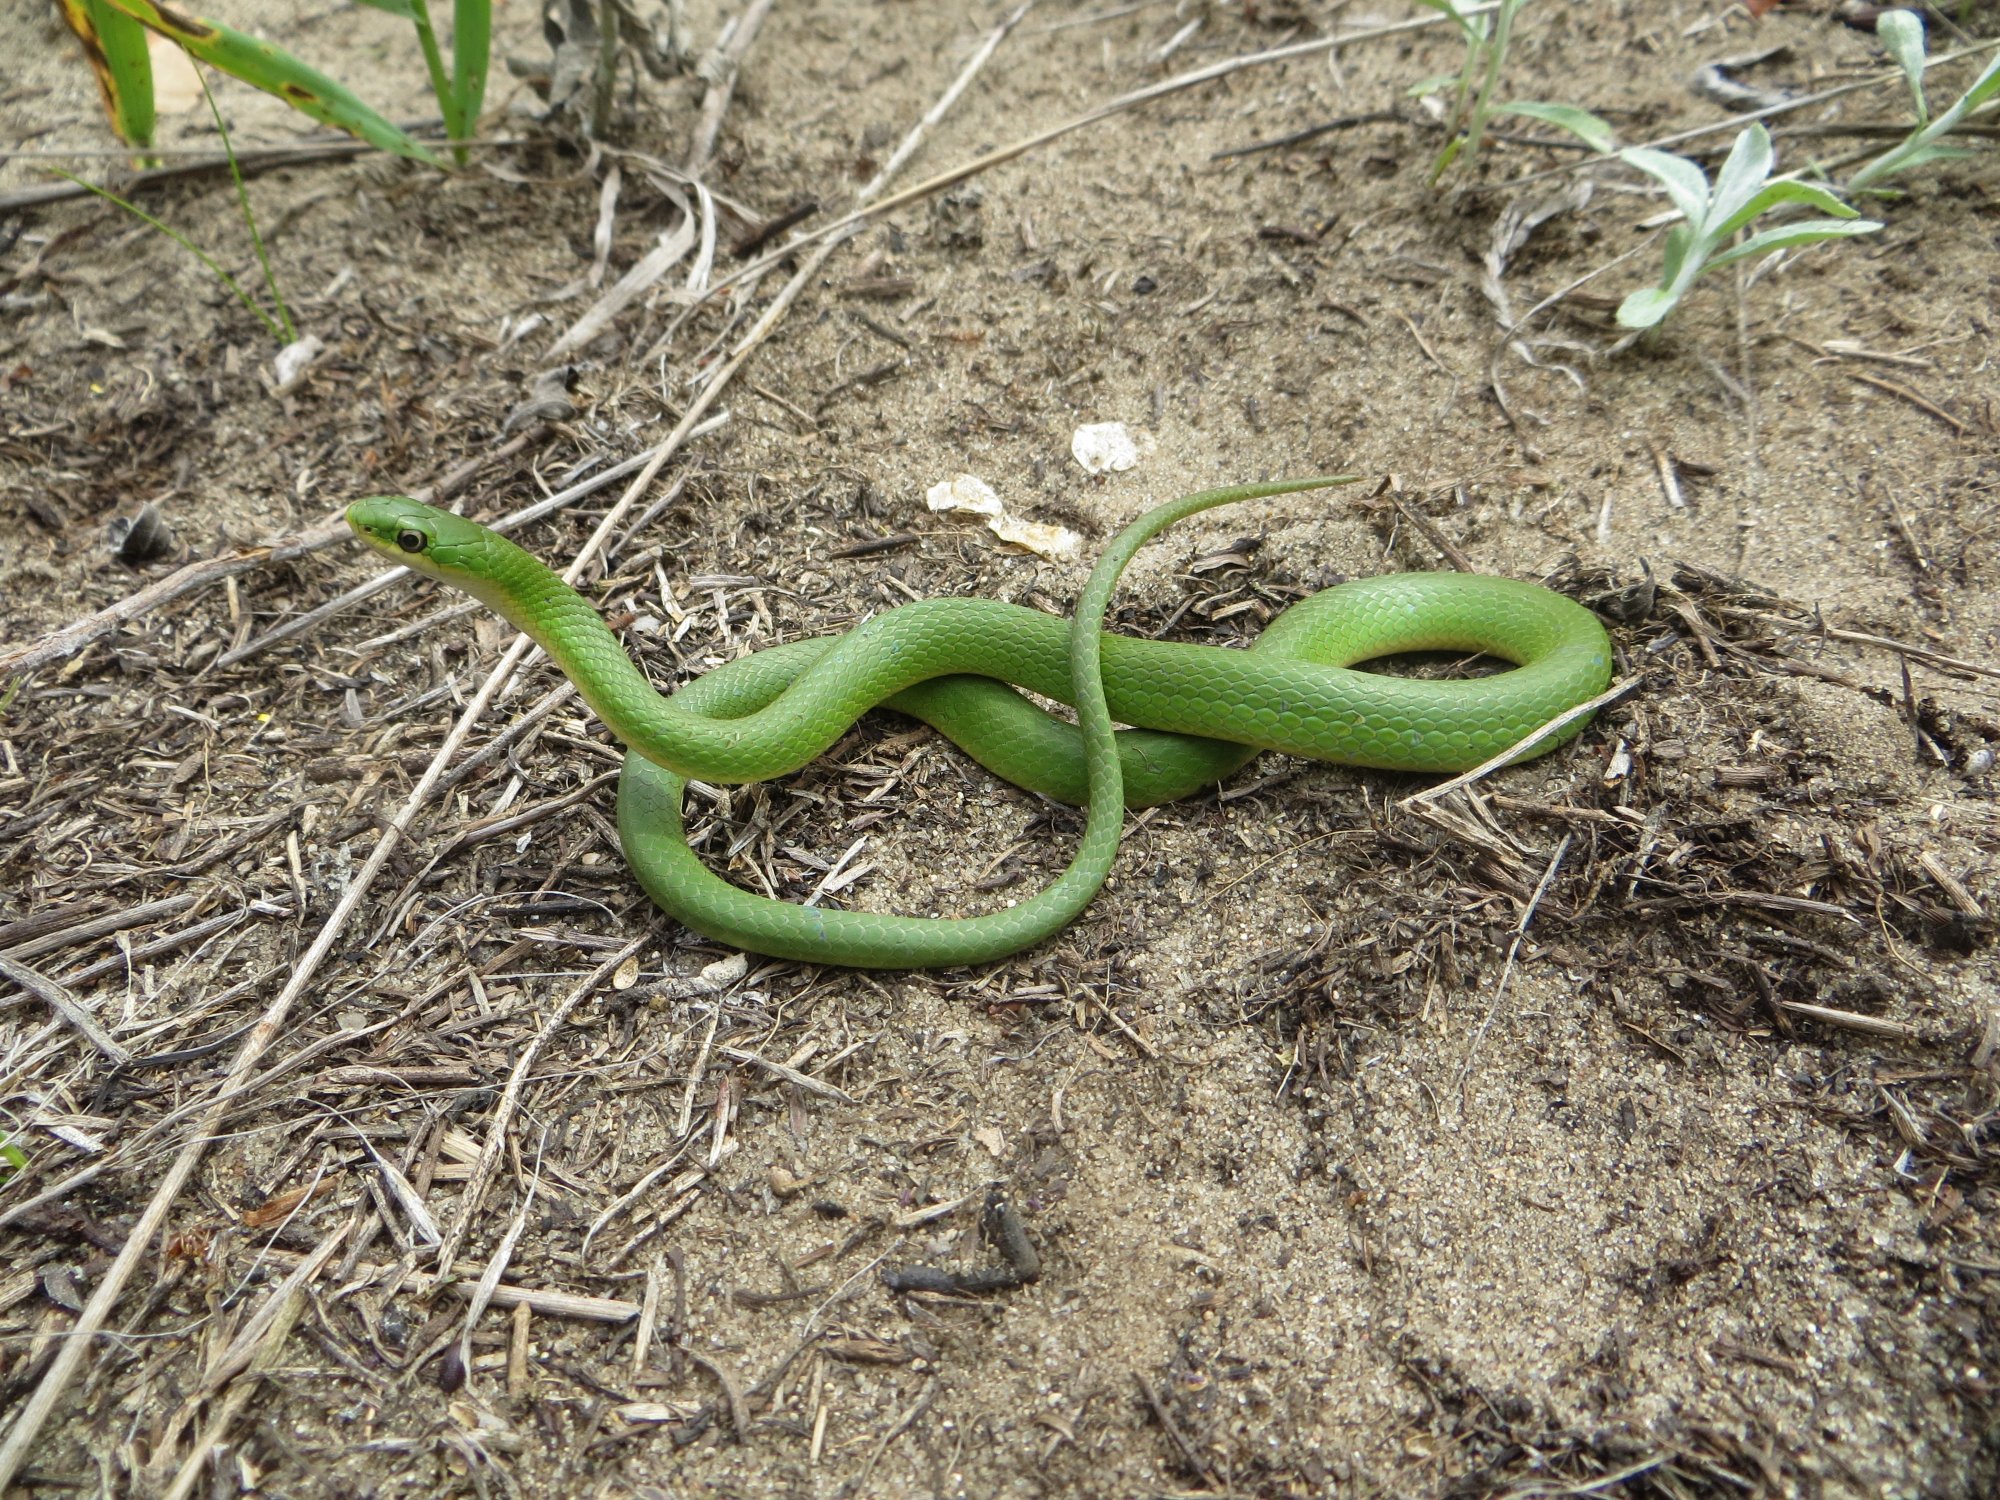 Smooth Green Snake (Opheodrys vernalis) - Reptiles and Amphibians of ...